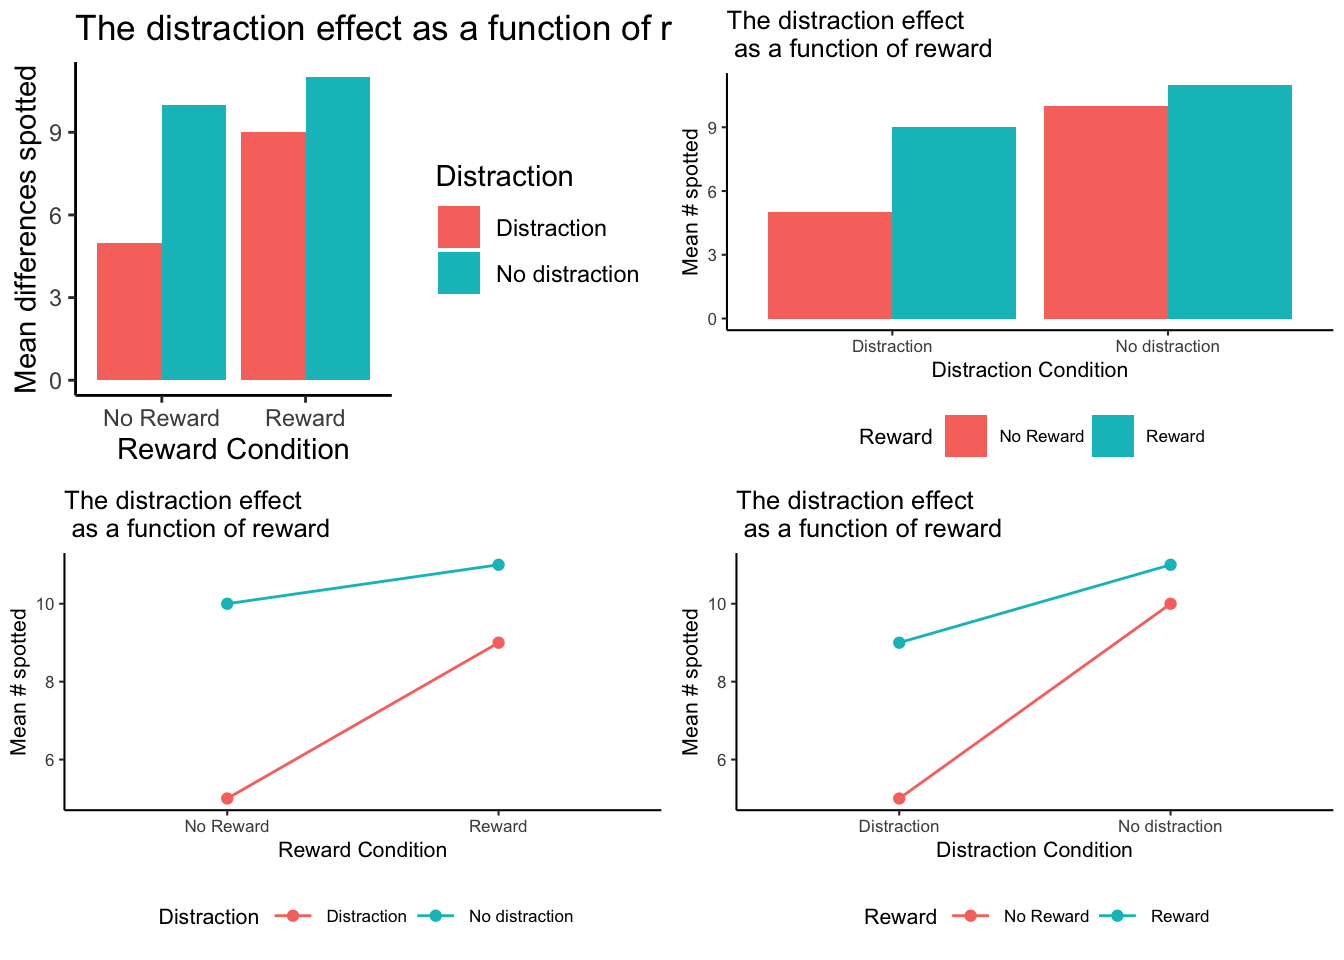 Two bar charts and two line graphs of the means to show the distraction effect in different ways.